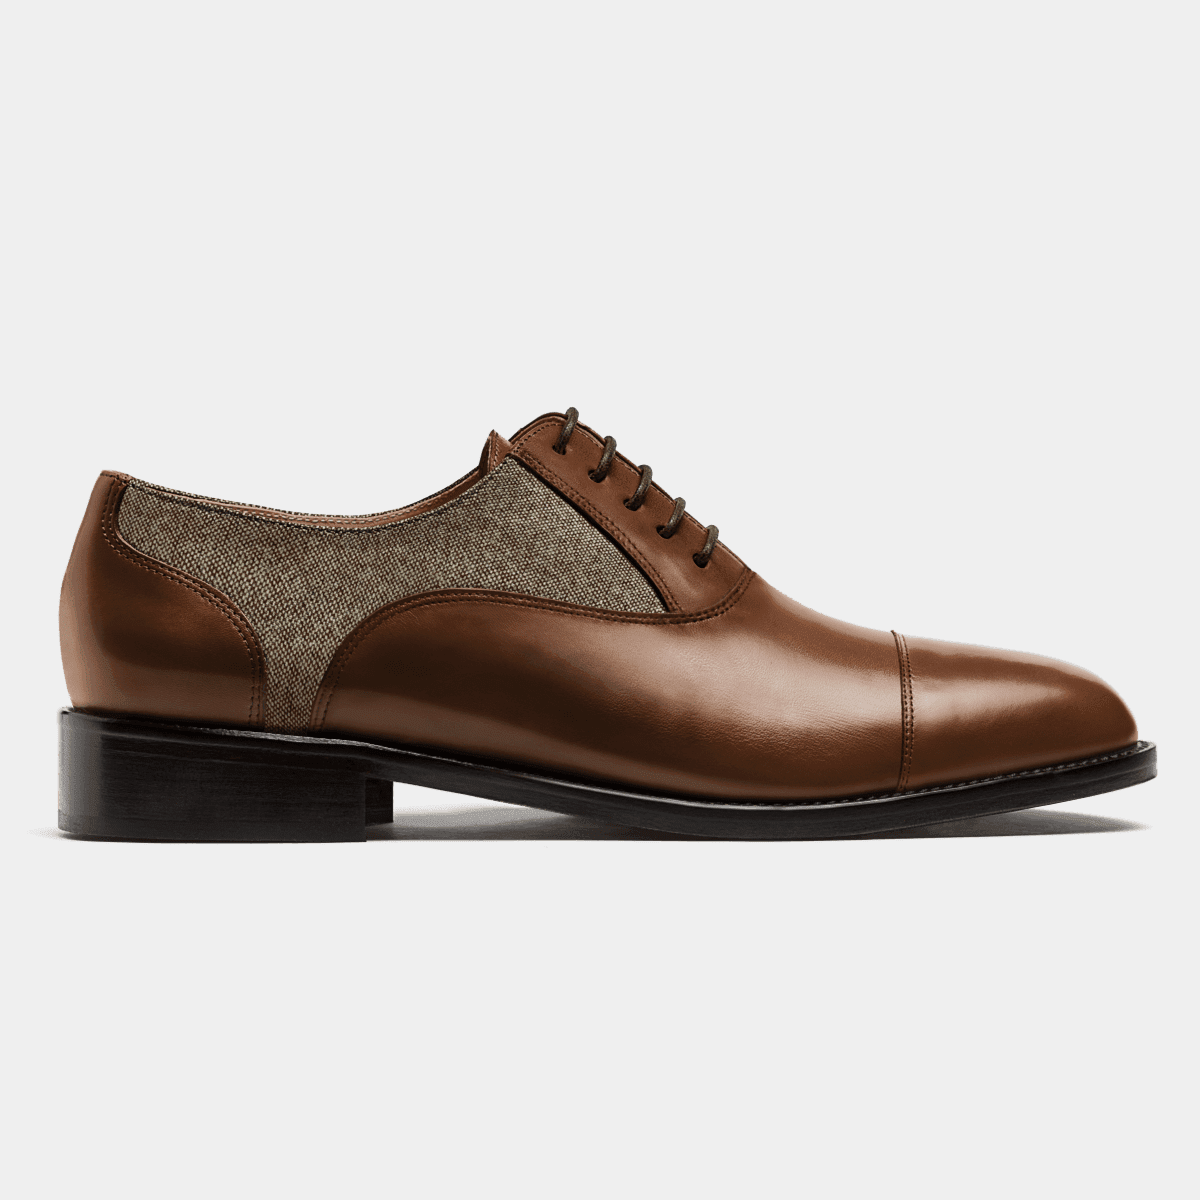 Cap toe Oxford dress shoes in brown leather & tweed